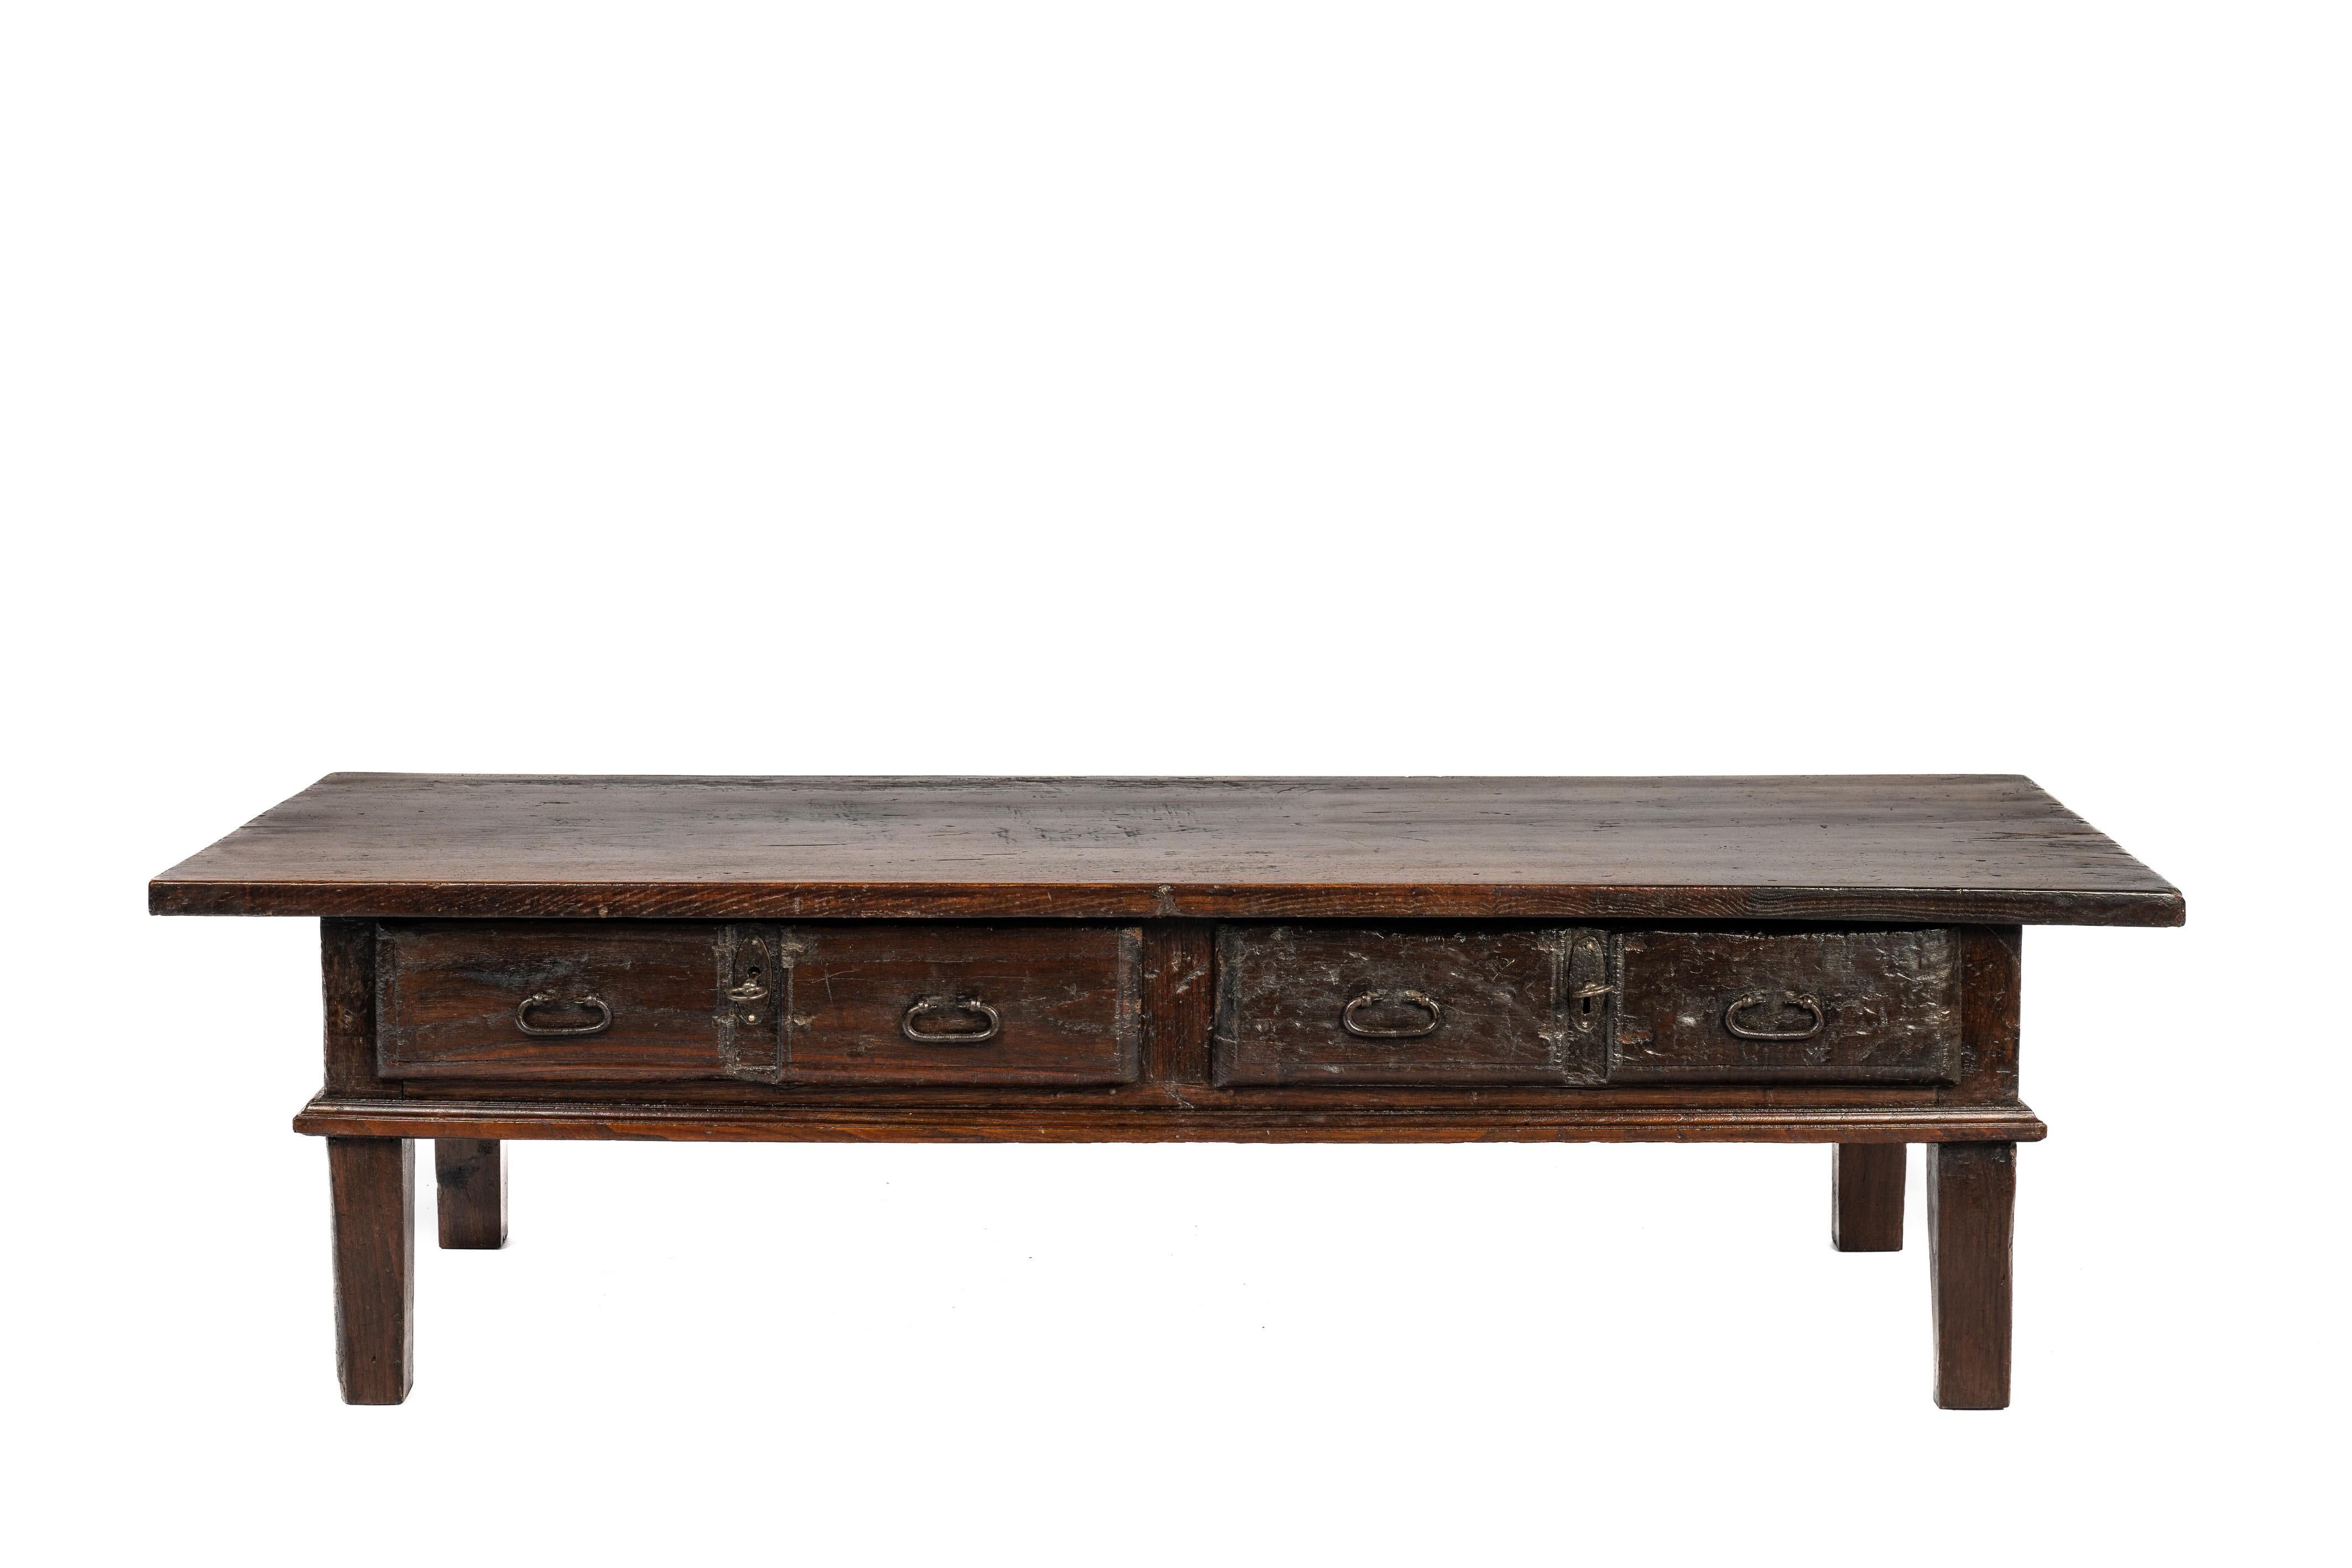 On offer here is a fantastic coffee table or low table that originates in rural Spain and dates circa 1800. The table has a unique top that was made from one single board of solid chestnut wood that is 1.2 inches thick. The top has a beautiful